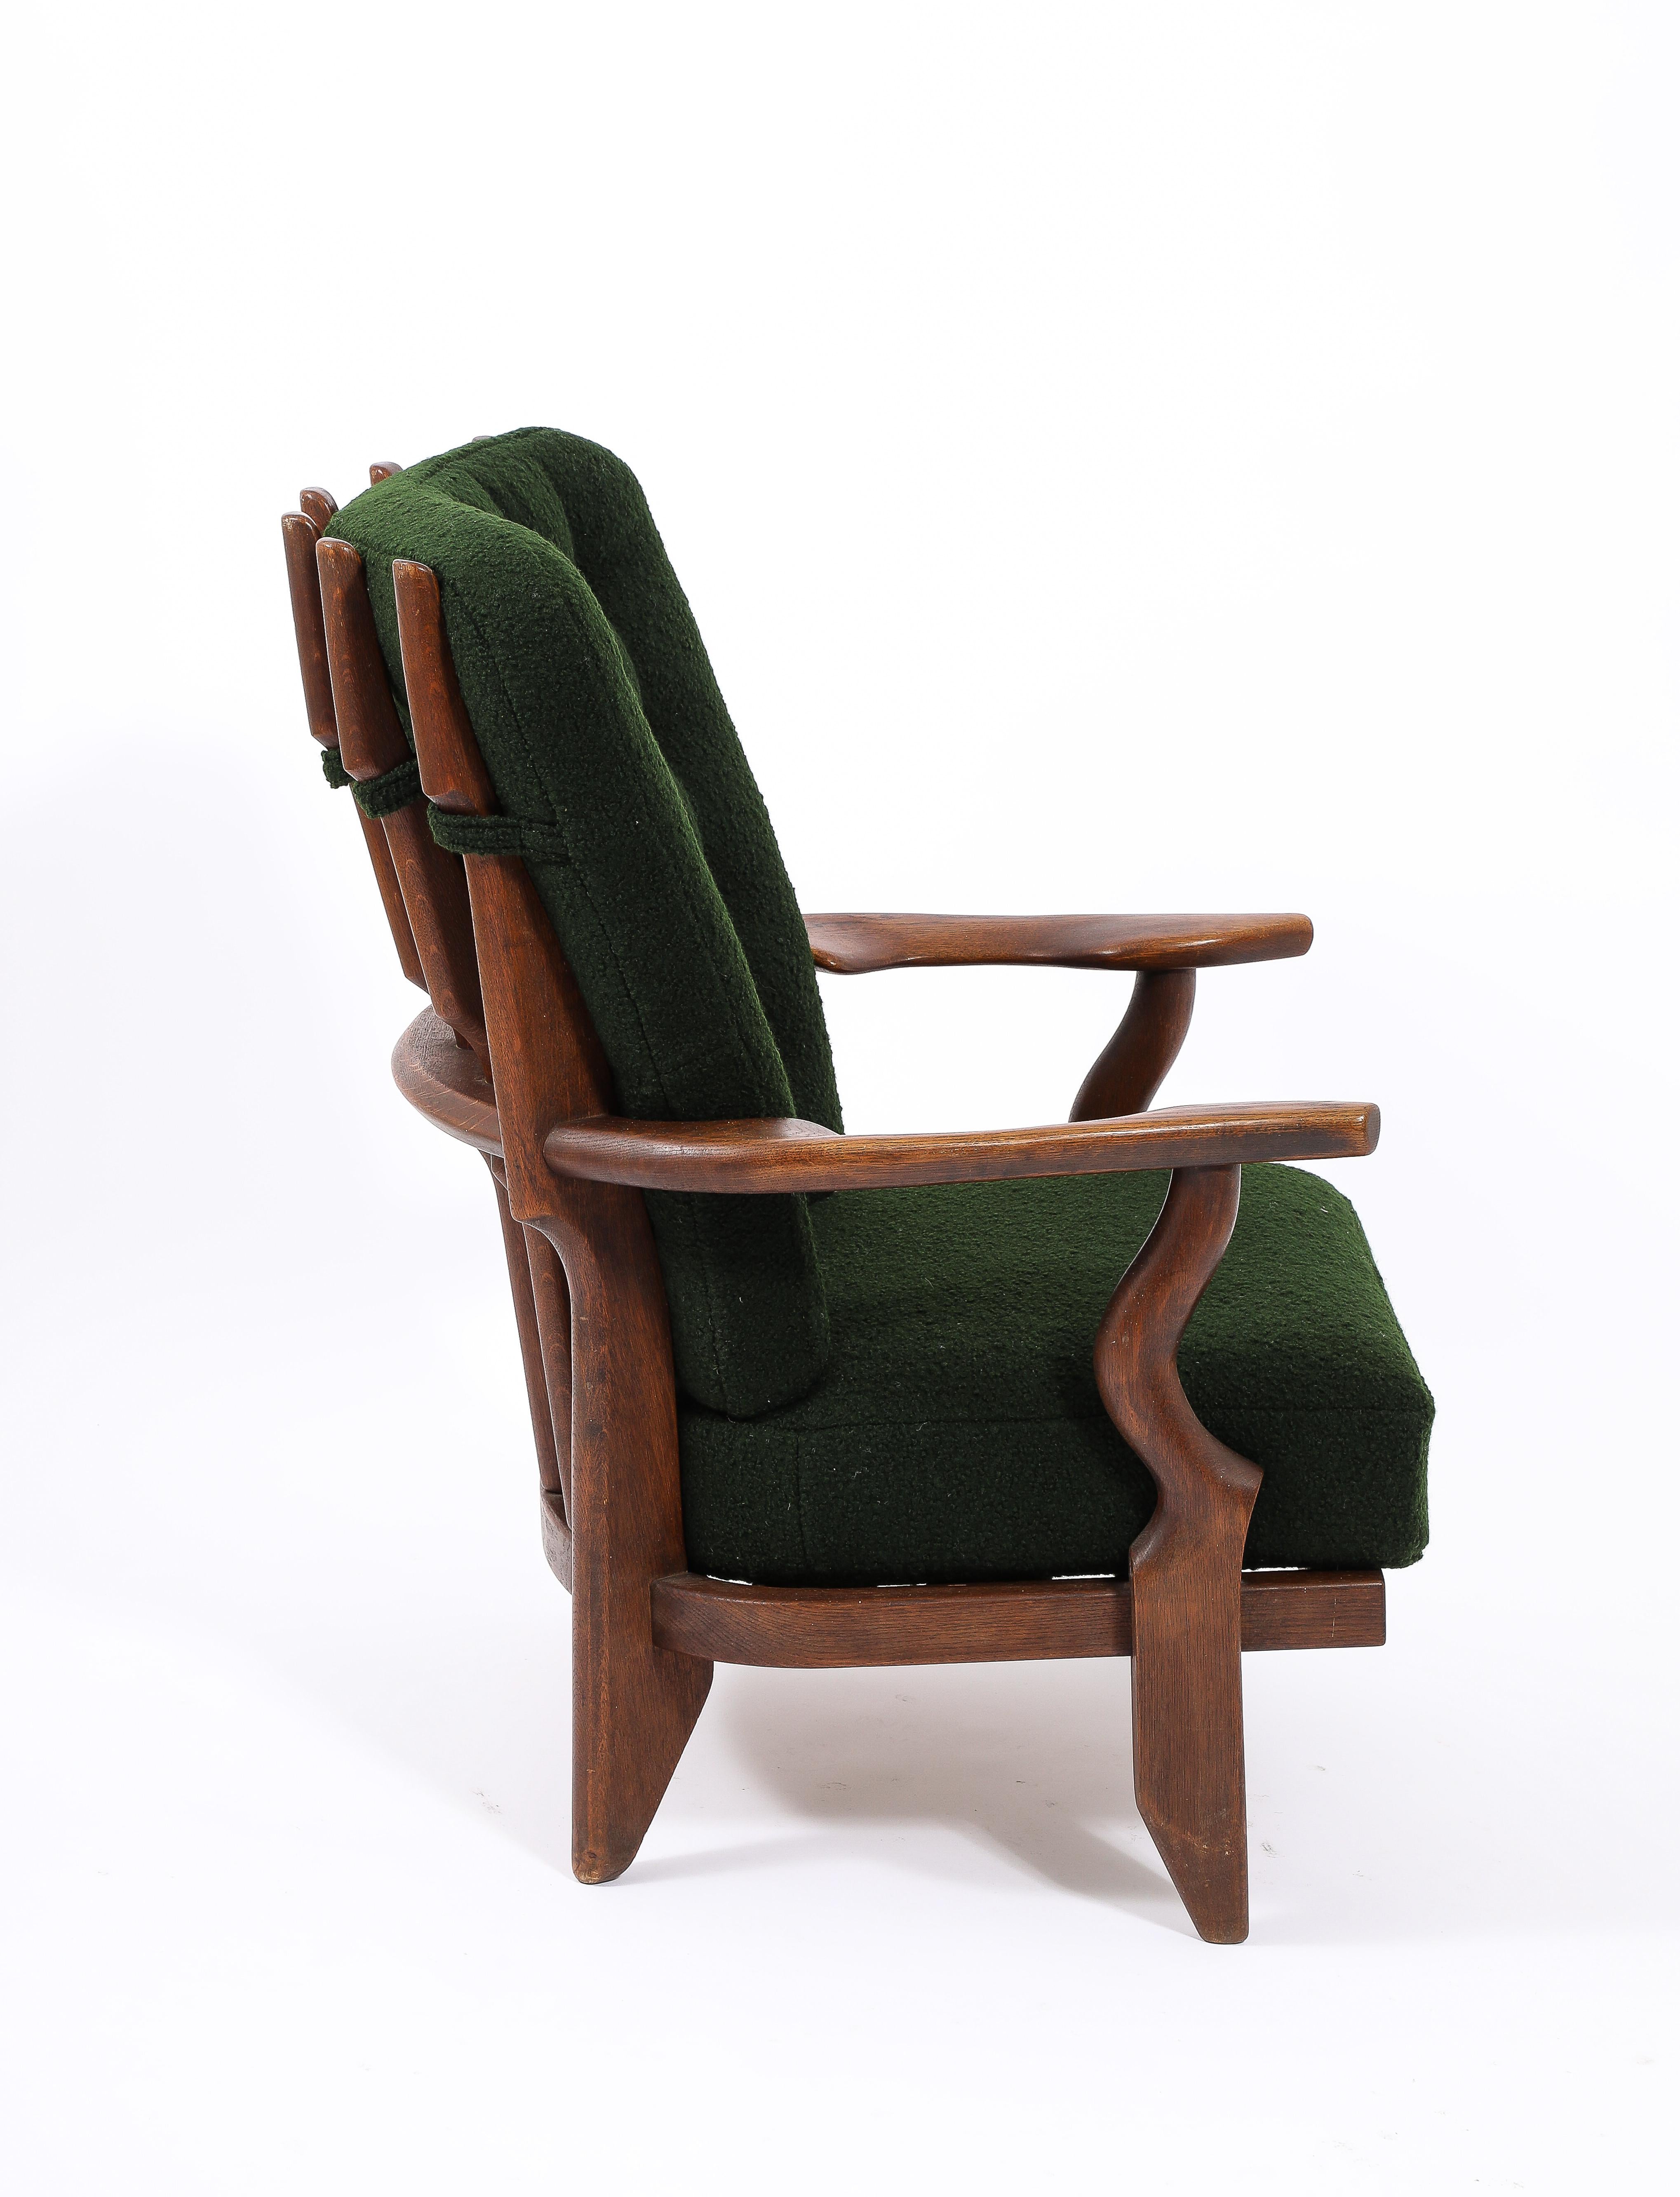 Guillerme & Chambron Petit Repos Armchair in Green Bouclé, France 1950's For Sale 6